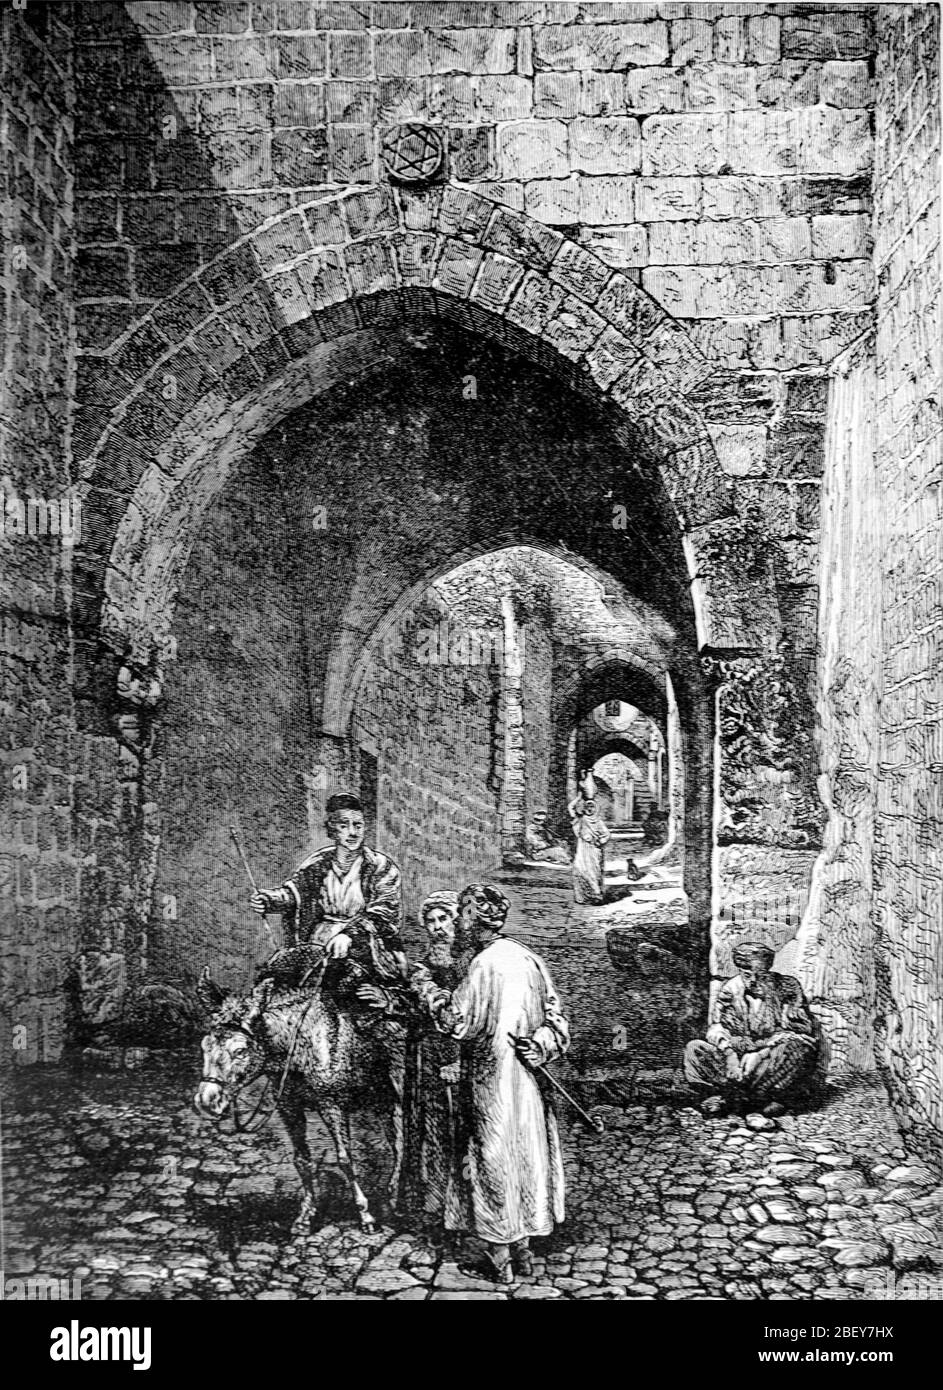 Street Scene with Donkey in the Old Town or Historic District of Jerusalem Israel. Vintage or Old Illustration or Engraving 1888 Stock Photo